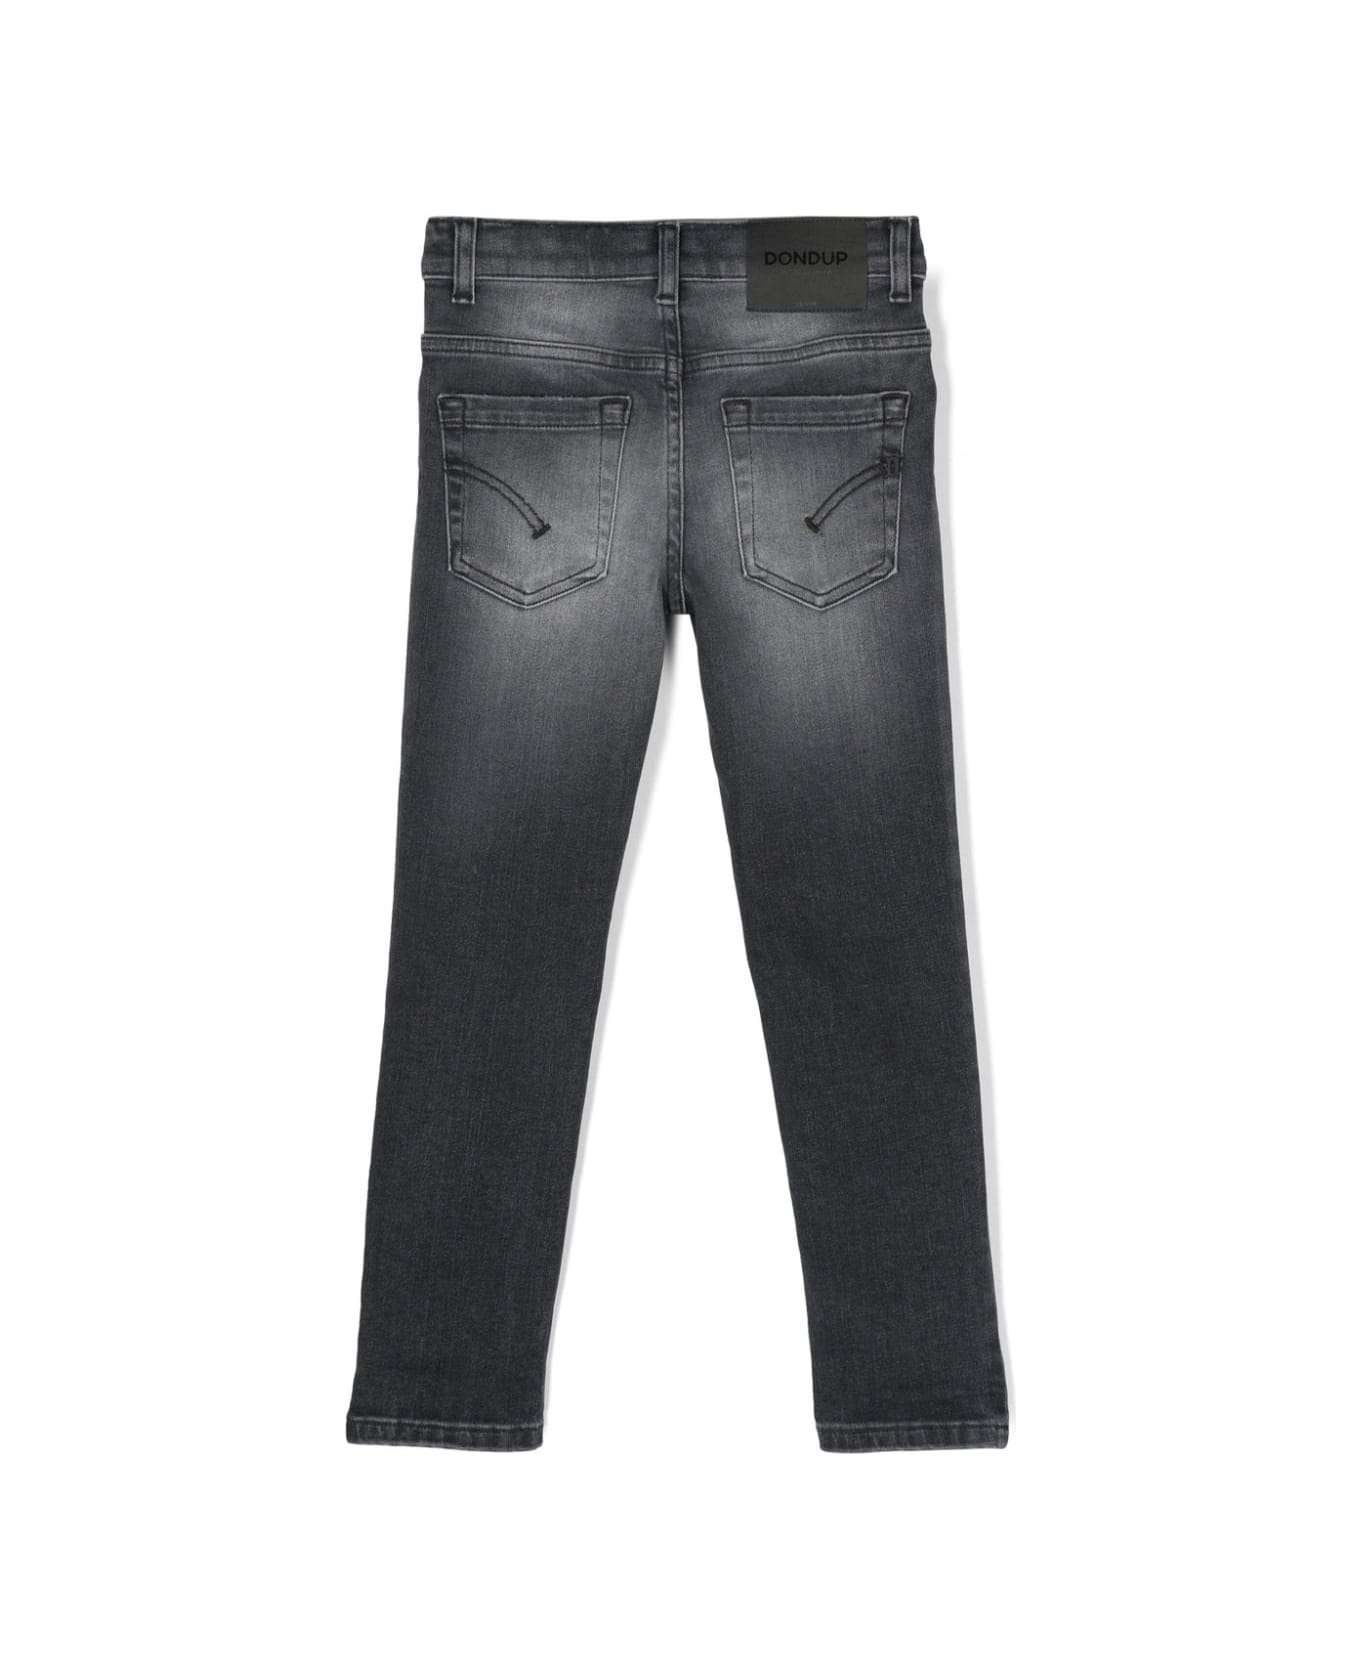 Dondup Black George Jeans With Abrasions - Grey